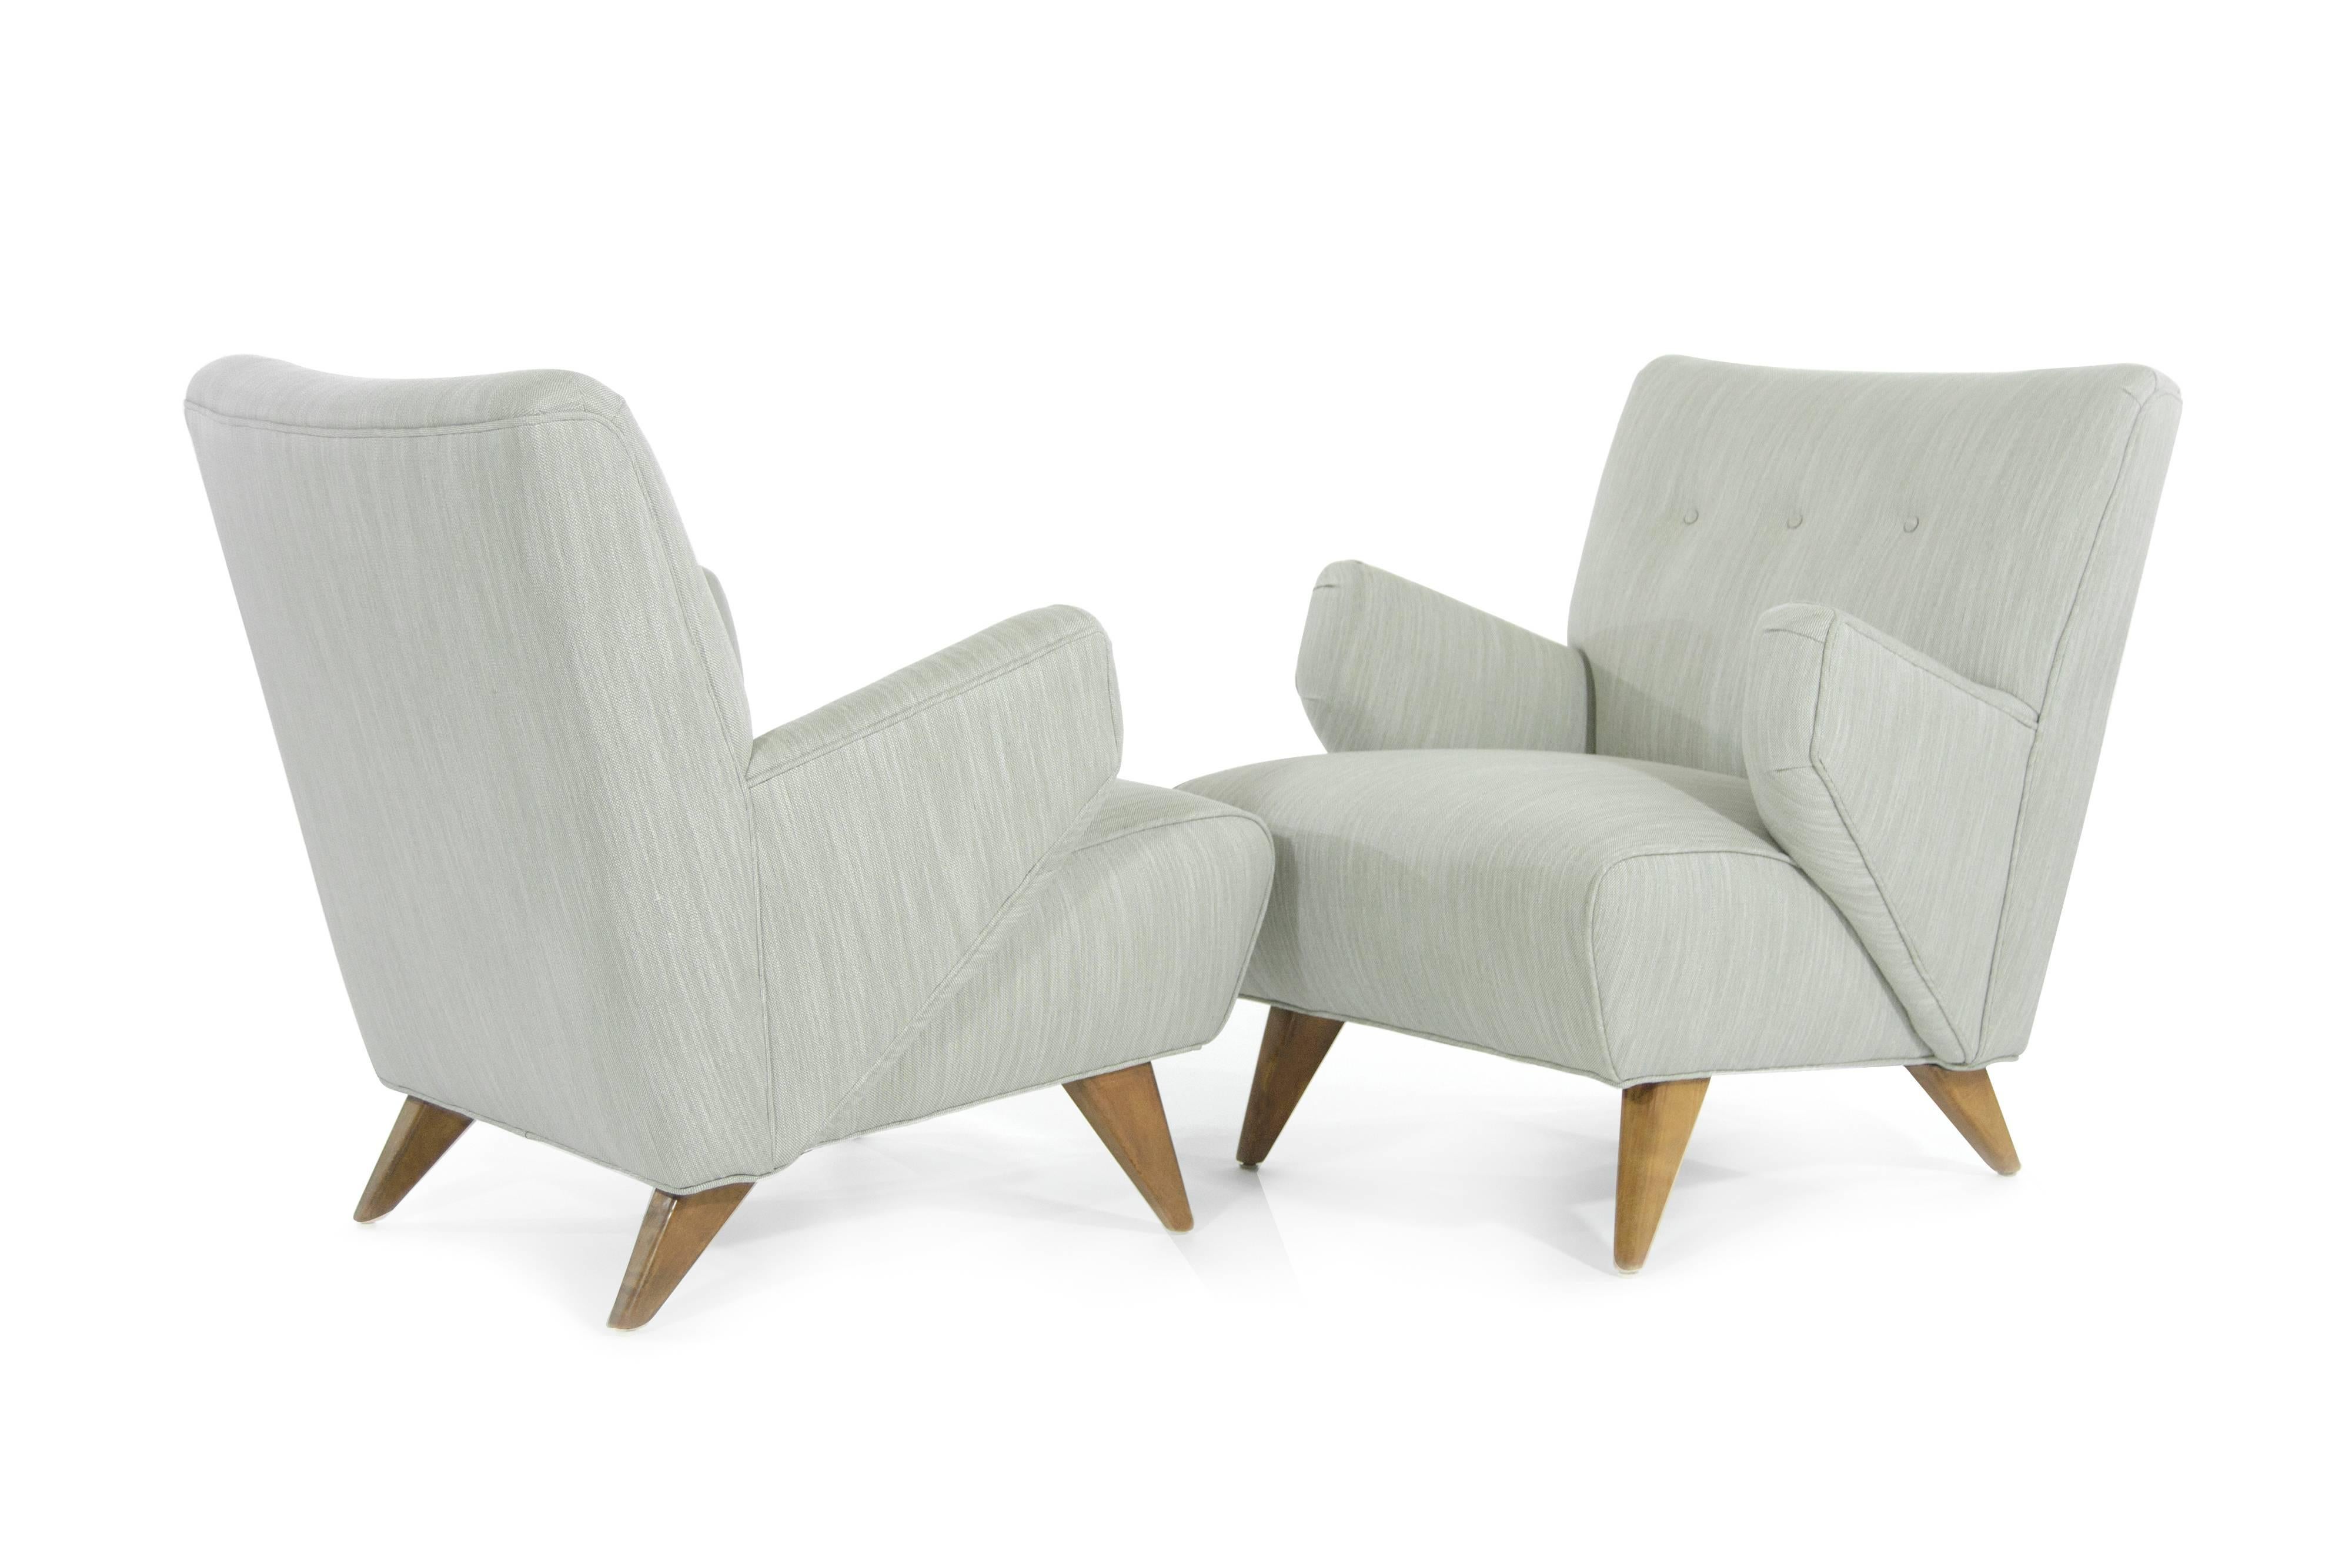 Mid-Century Modern Jens Risom for Knoll Associates Lounge Chairs